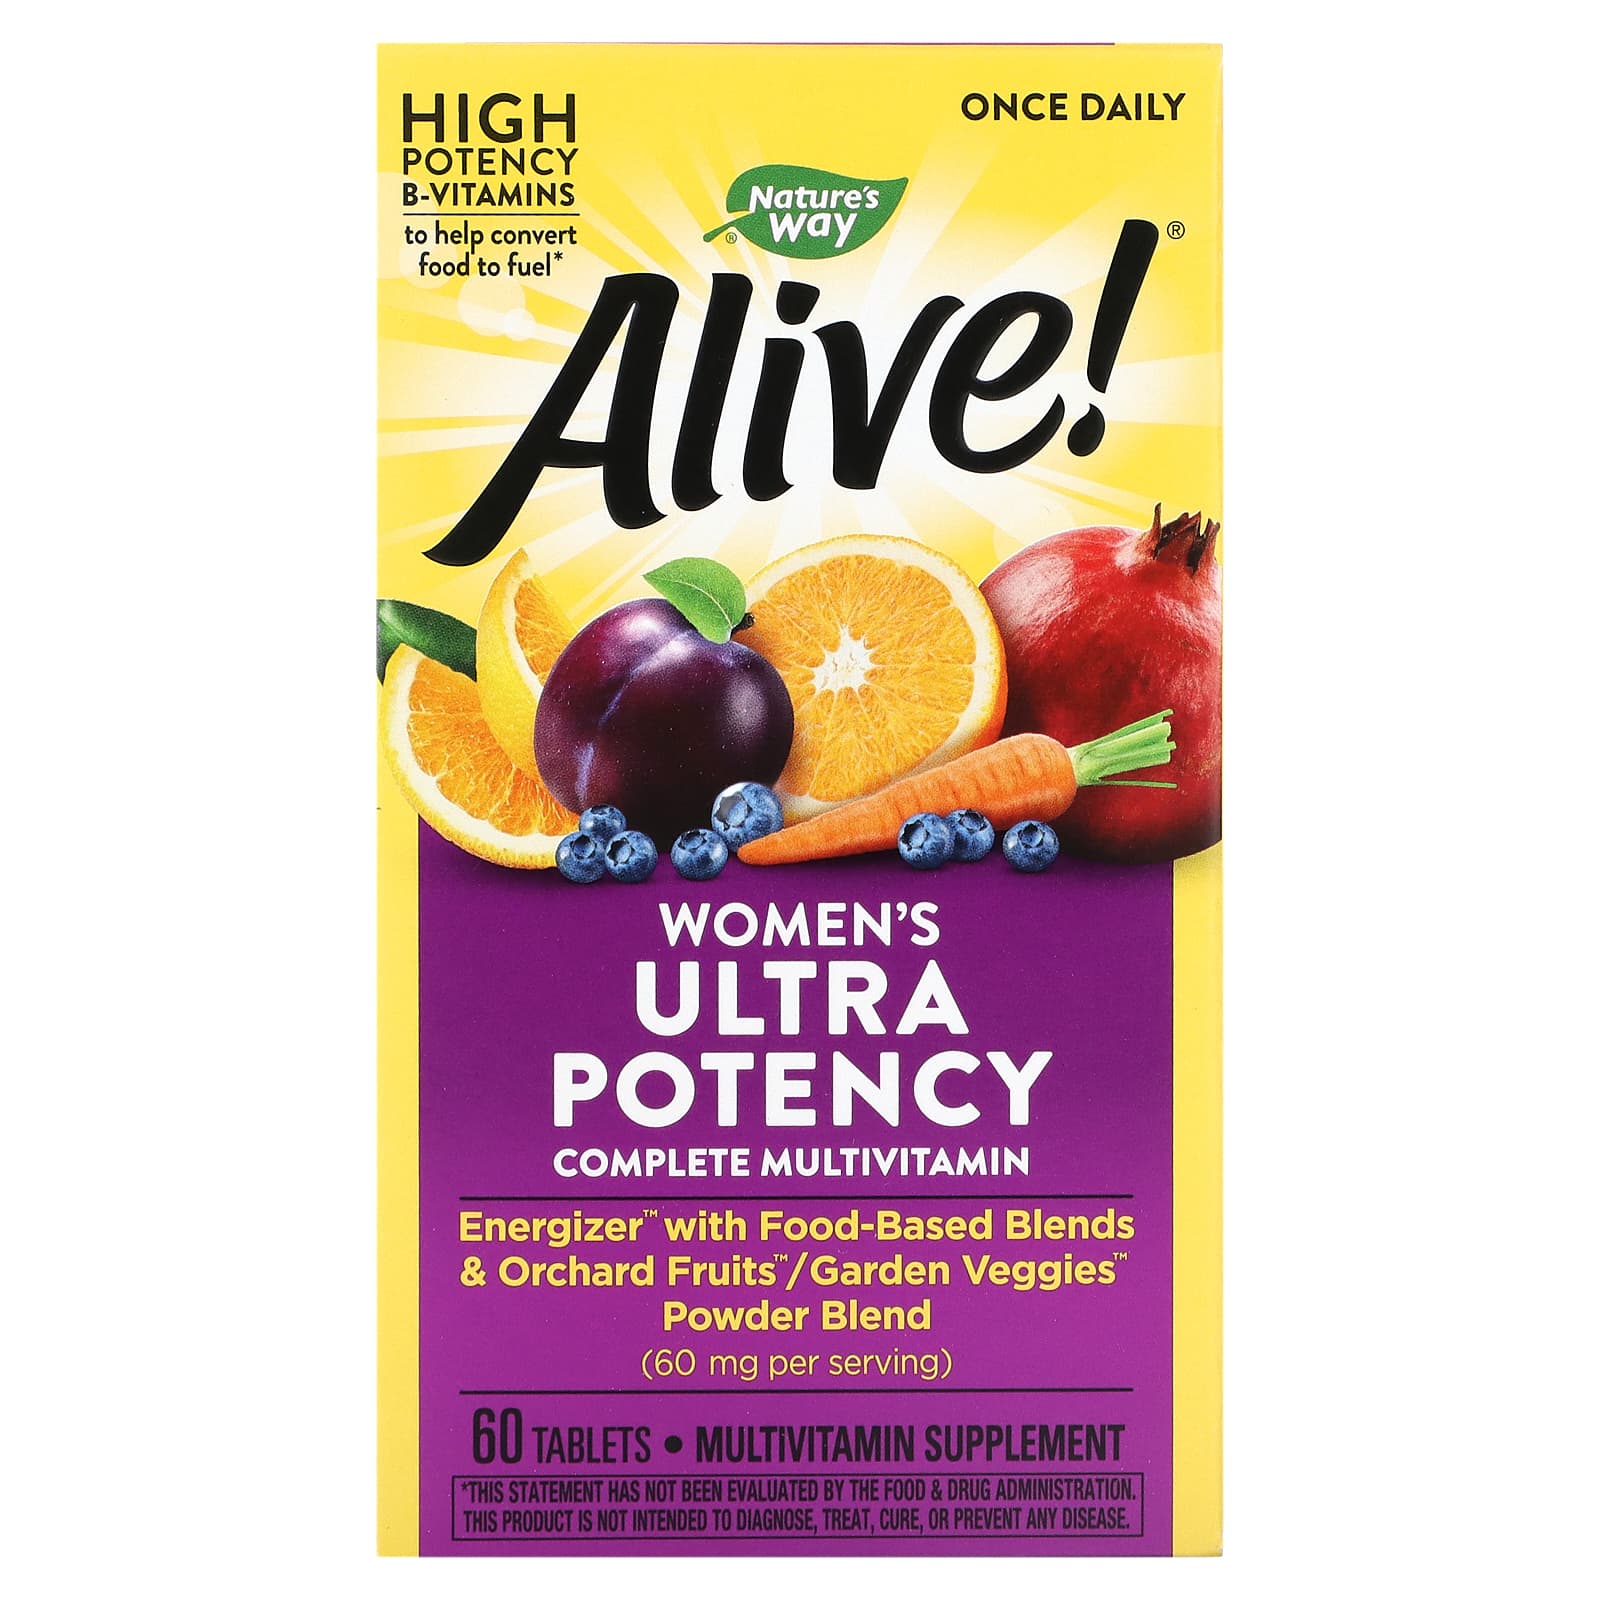 Nature's Way Alive! Once Daily, Women's Ultra Potency Complete Multivitamin, 60 Tablets